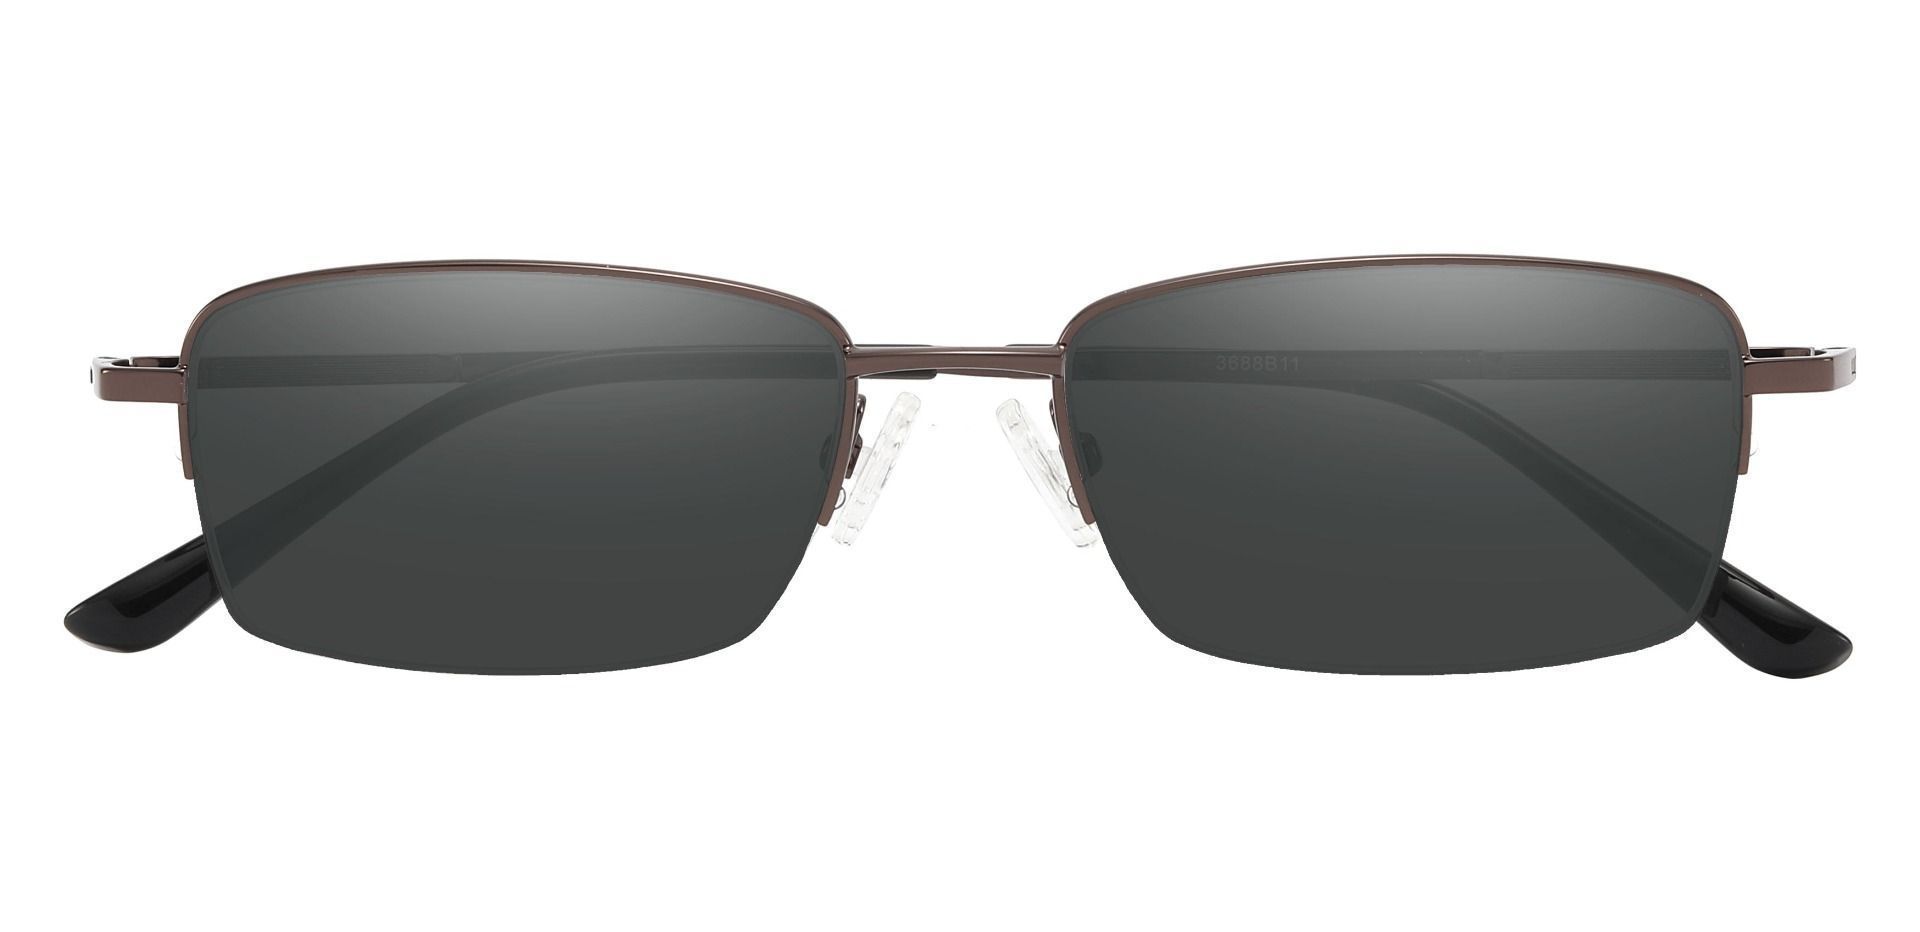 Milford Rectangle Non-Rx Sunglasses - Brown Frame With Gray Lenses